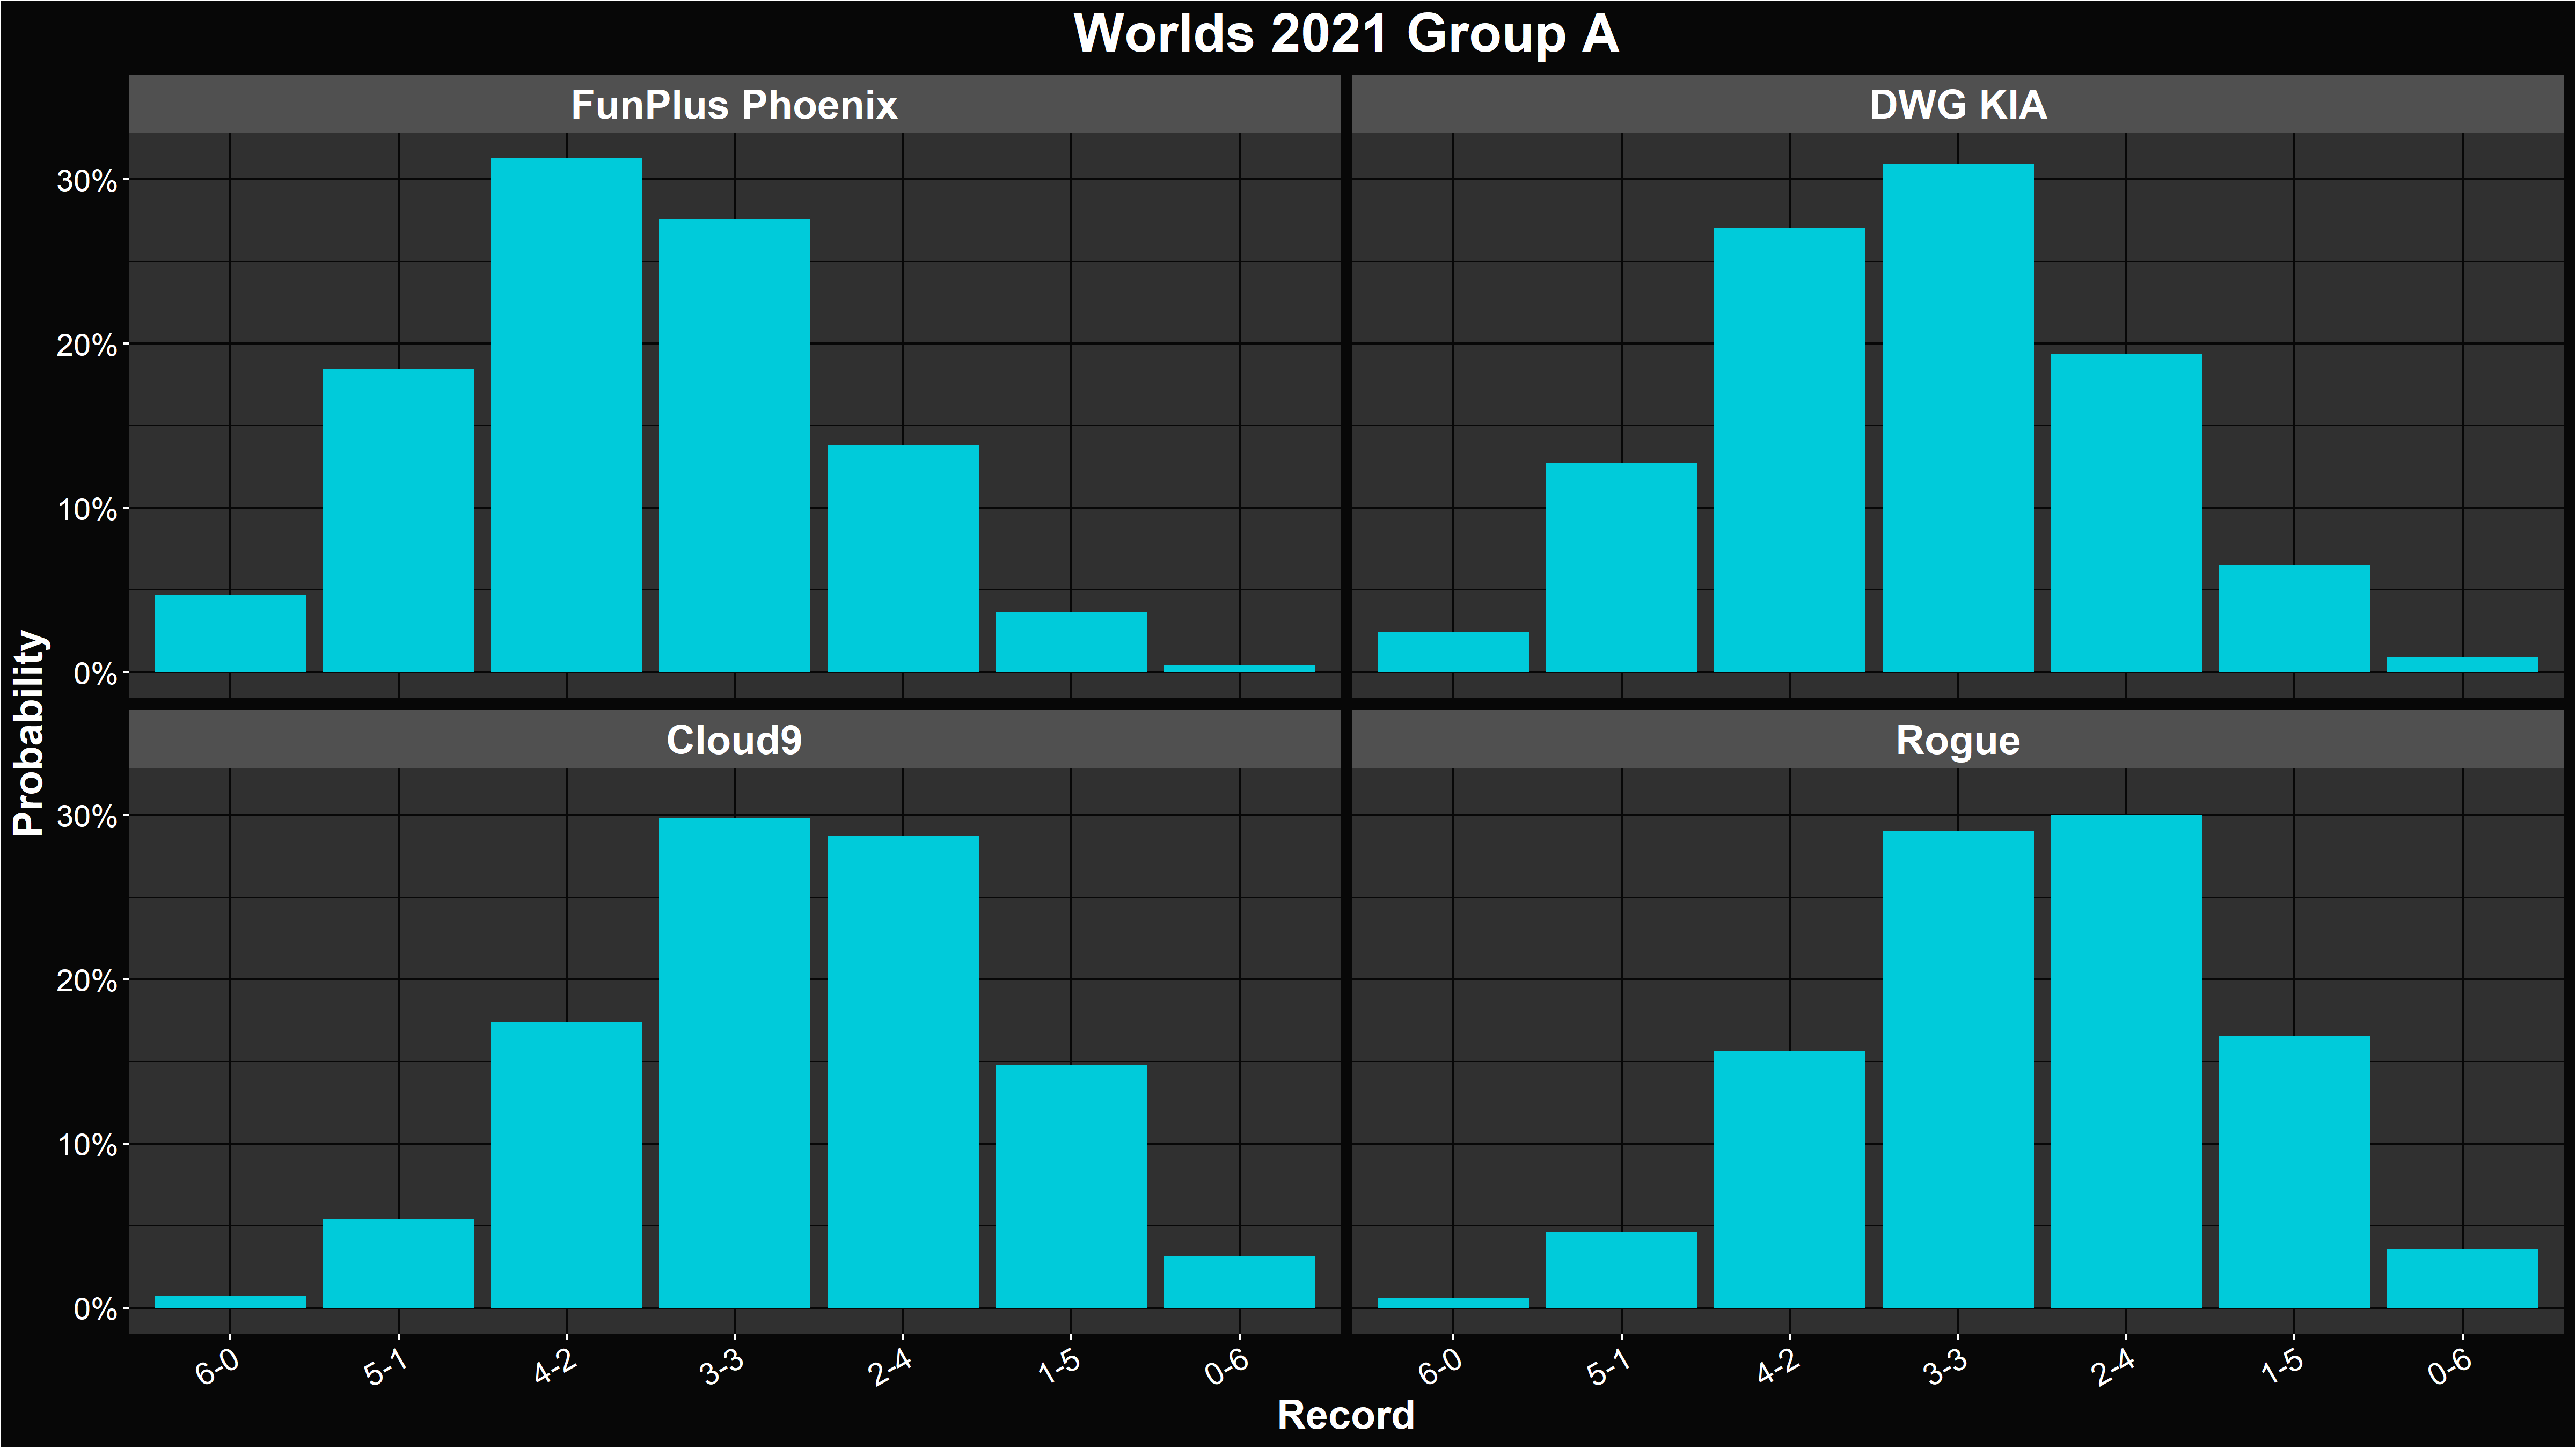 Alacrity's LoL Worlds 2021 Group A Record Distributions